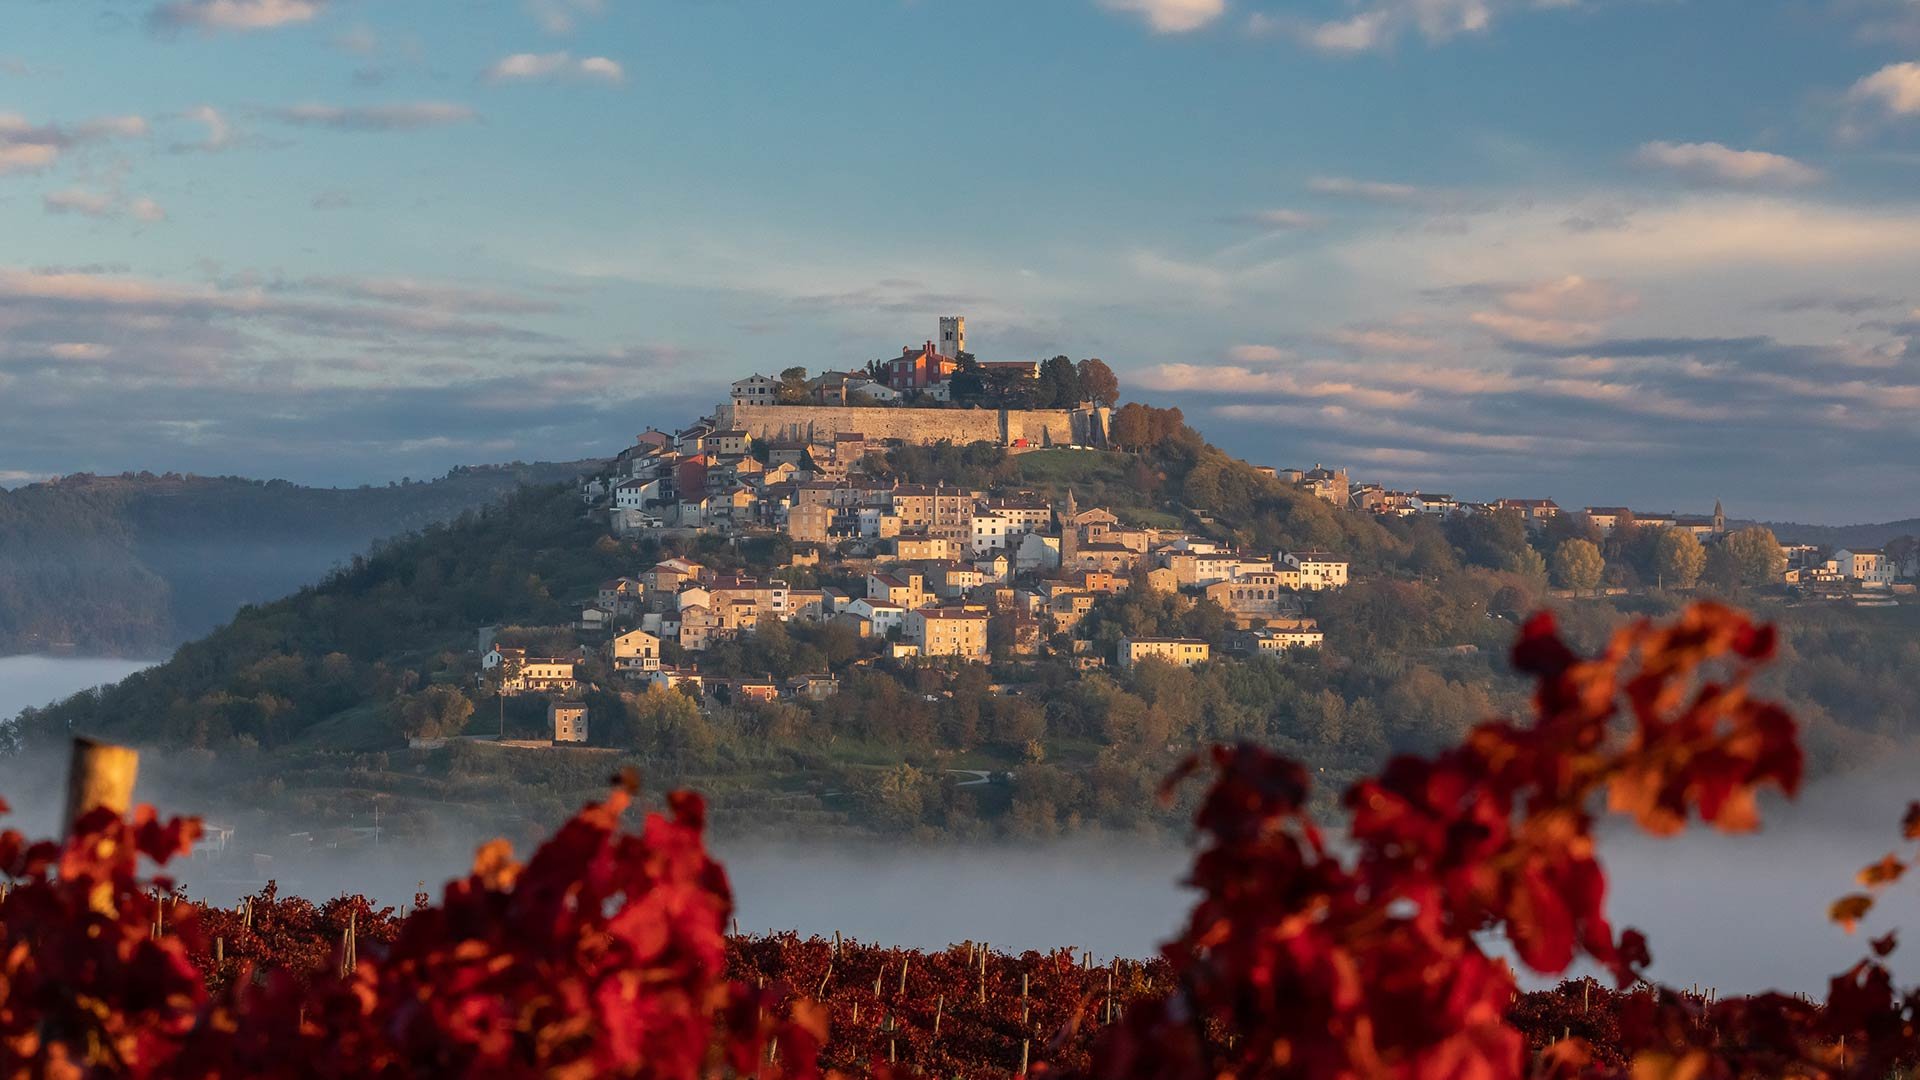 Motovun: A hidden gem for an unforgettable holiday and a great opportunity to invest in real property and tourism